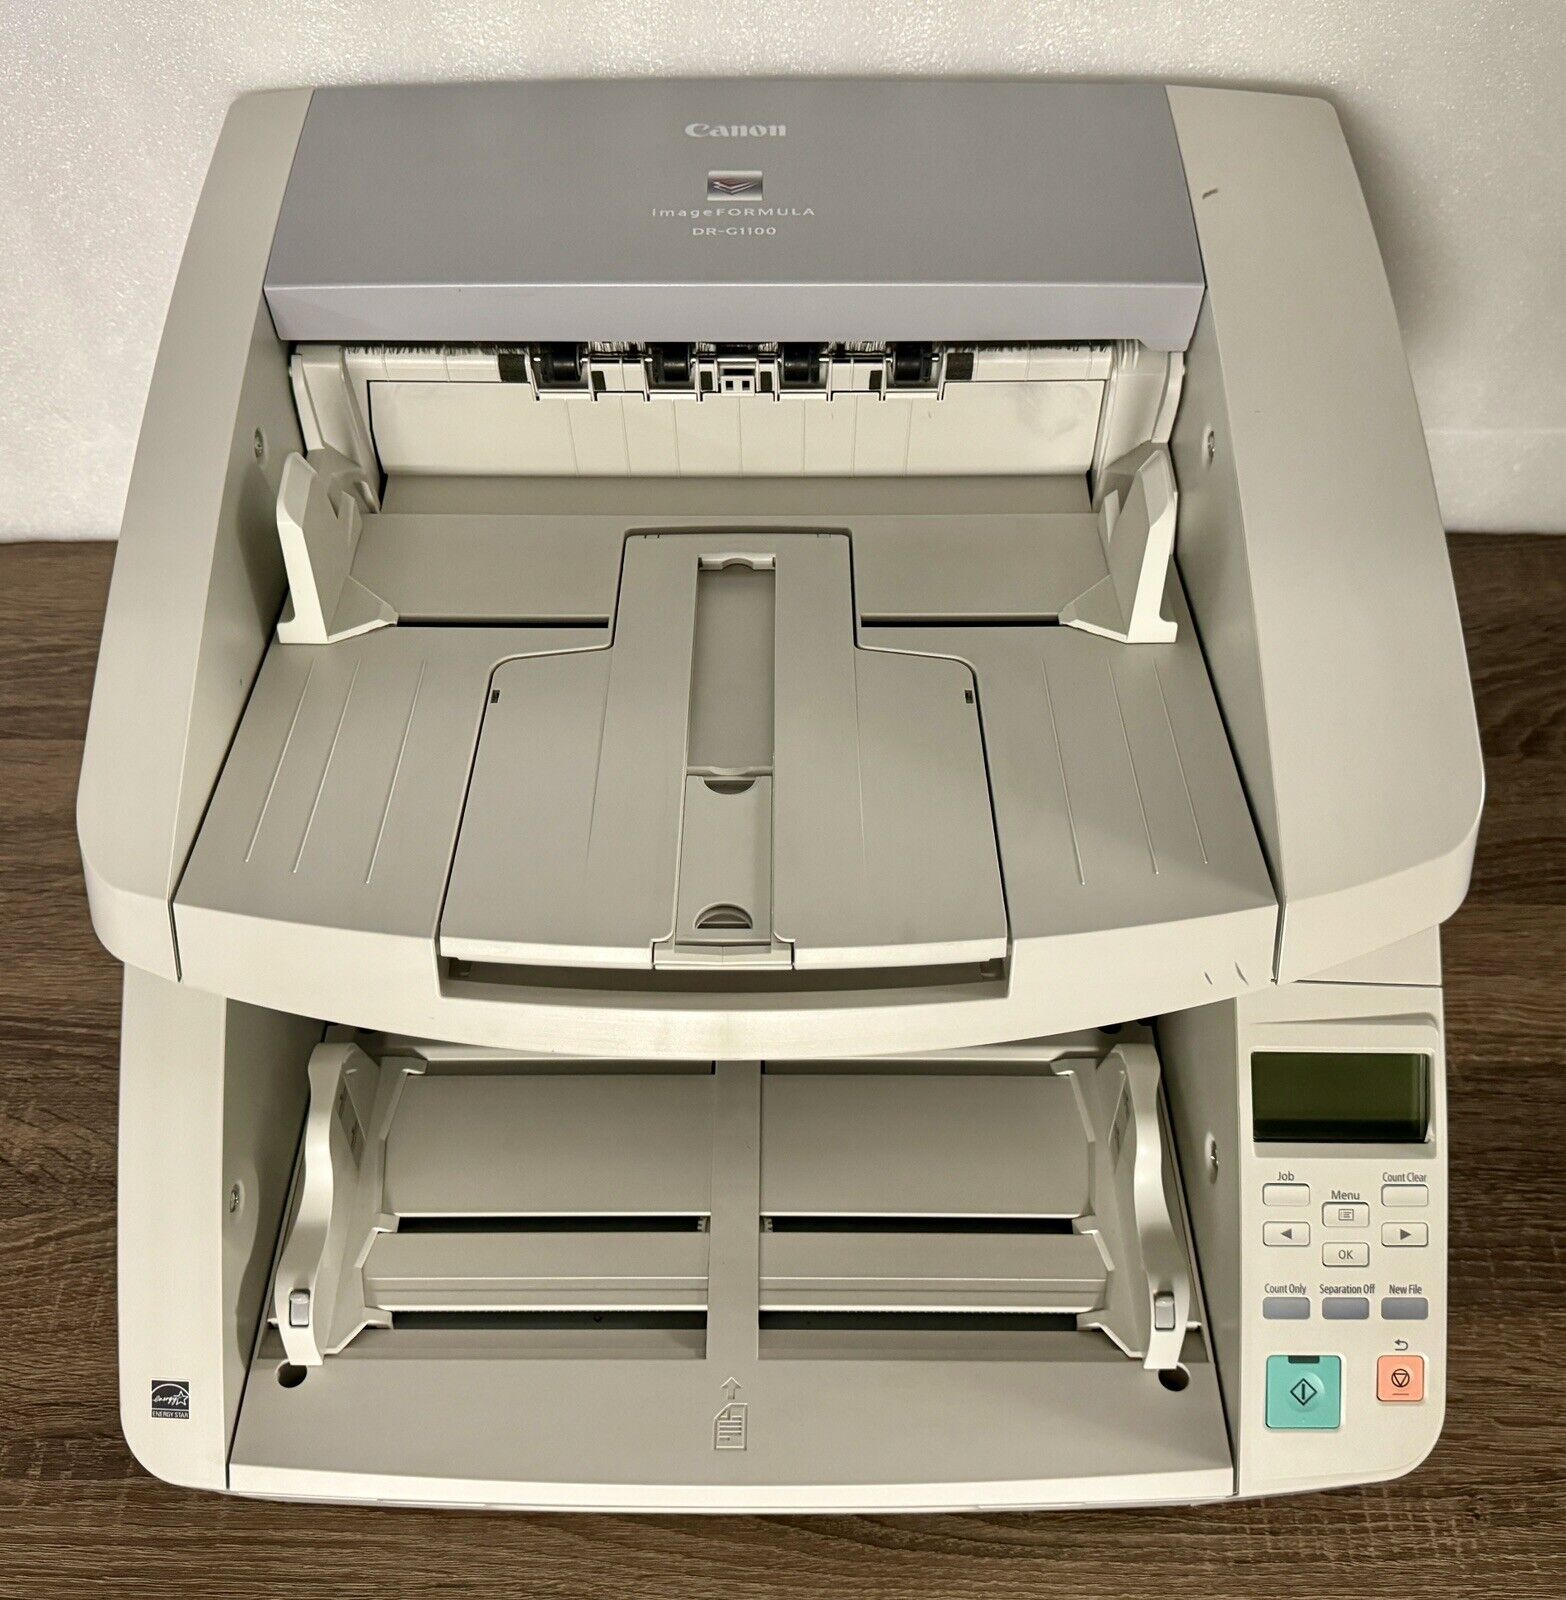 Canon imageFORMULA DR-G1100 High-Speed Production Document Scanner (M111181)